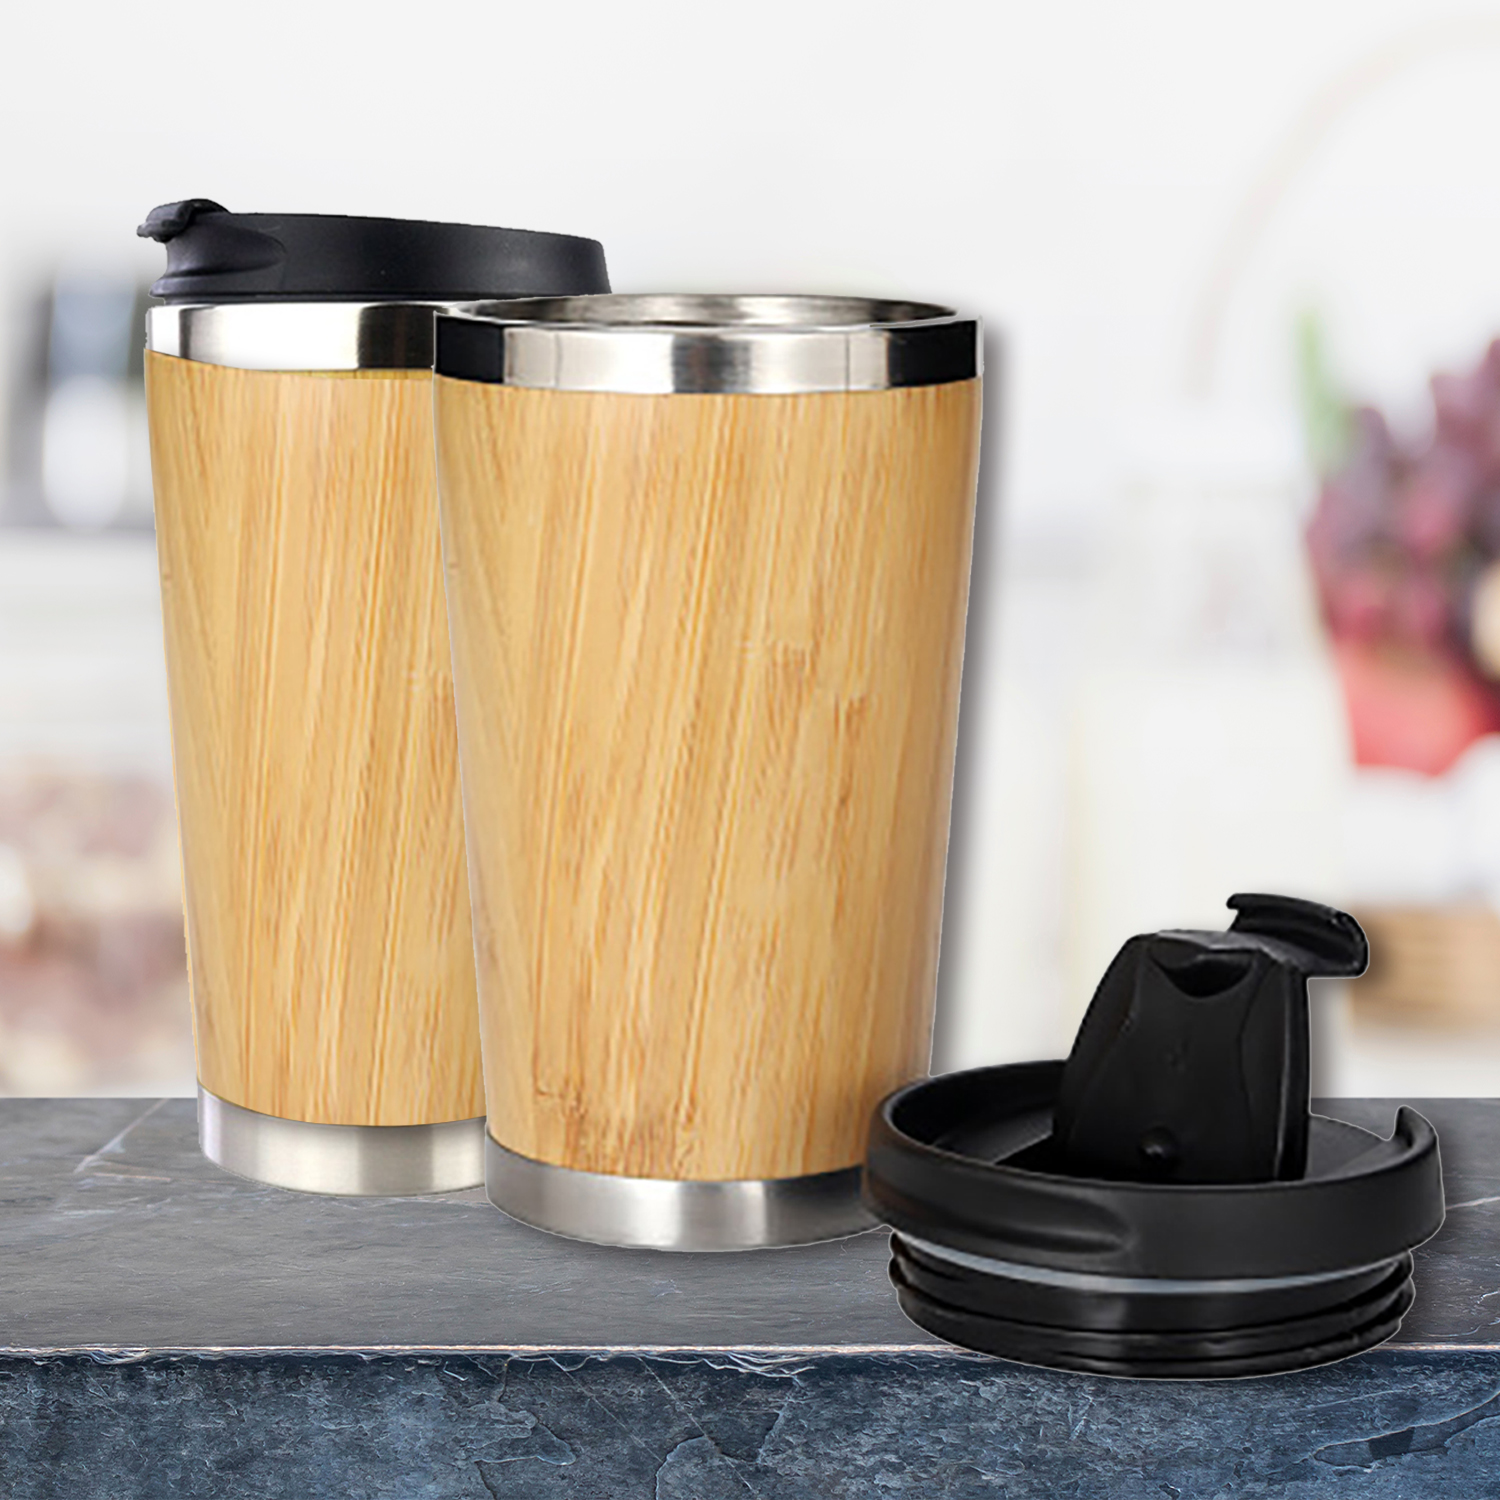 Bamboo Tumbler Mugs Bamboo Fibber Travel Mug Sustainable Stainless Steel with Lid Coffee Cup Tumbler Bottles Beer Coffee Mug Tea Cup